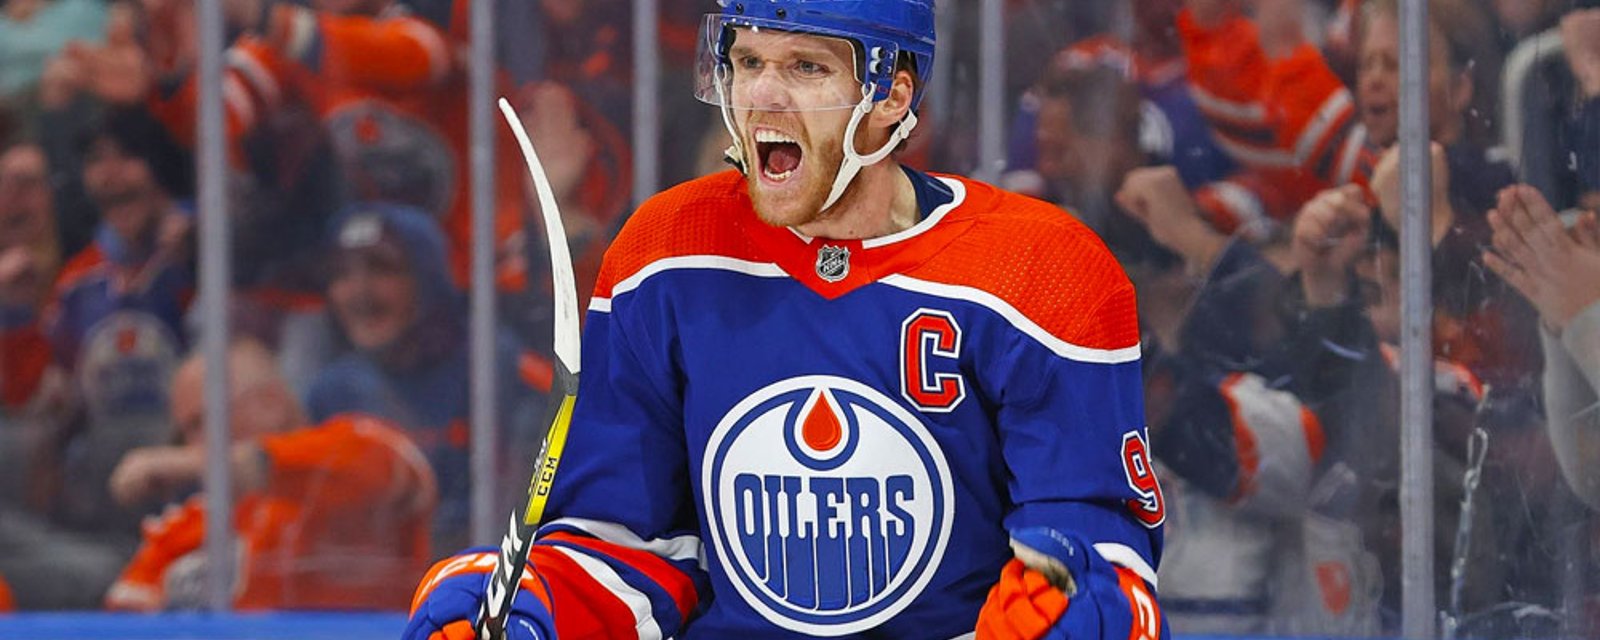 Oilers make a huge move to keep Connor McDavid in Edmonton long-term